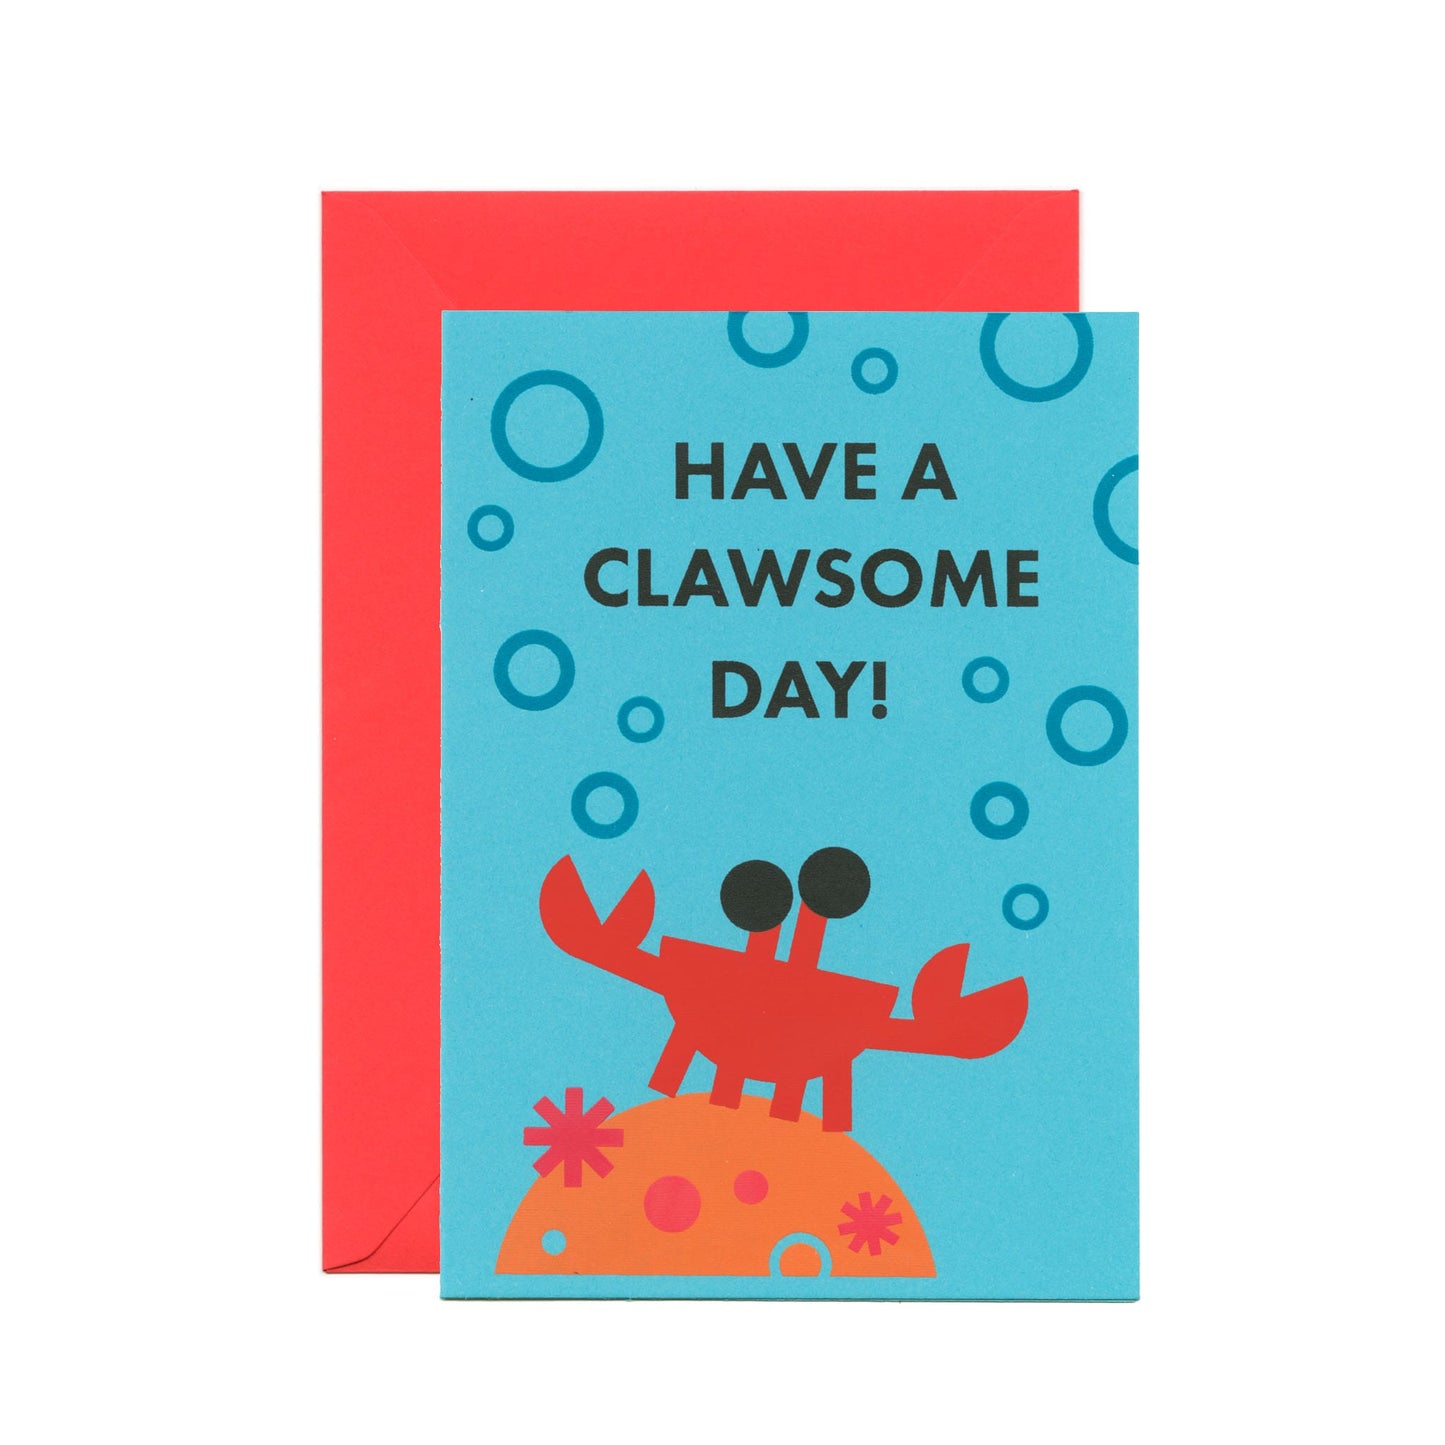 A blue greeting card with an illustration of a crab standing on coral surrounded by bubbles and a text says "Have a clawsome day!". There's a red-pink envelope behind the card.